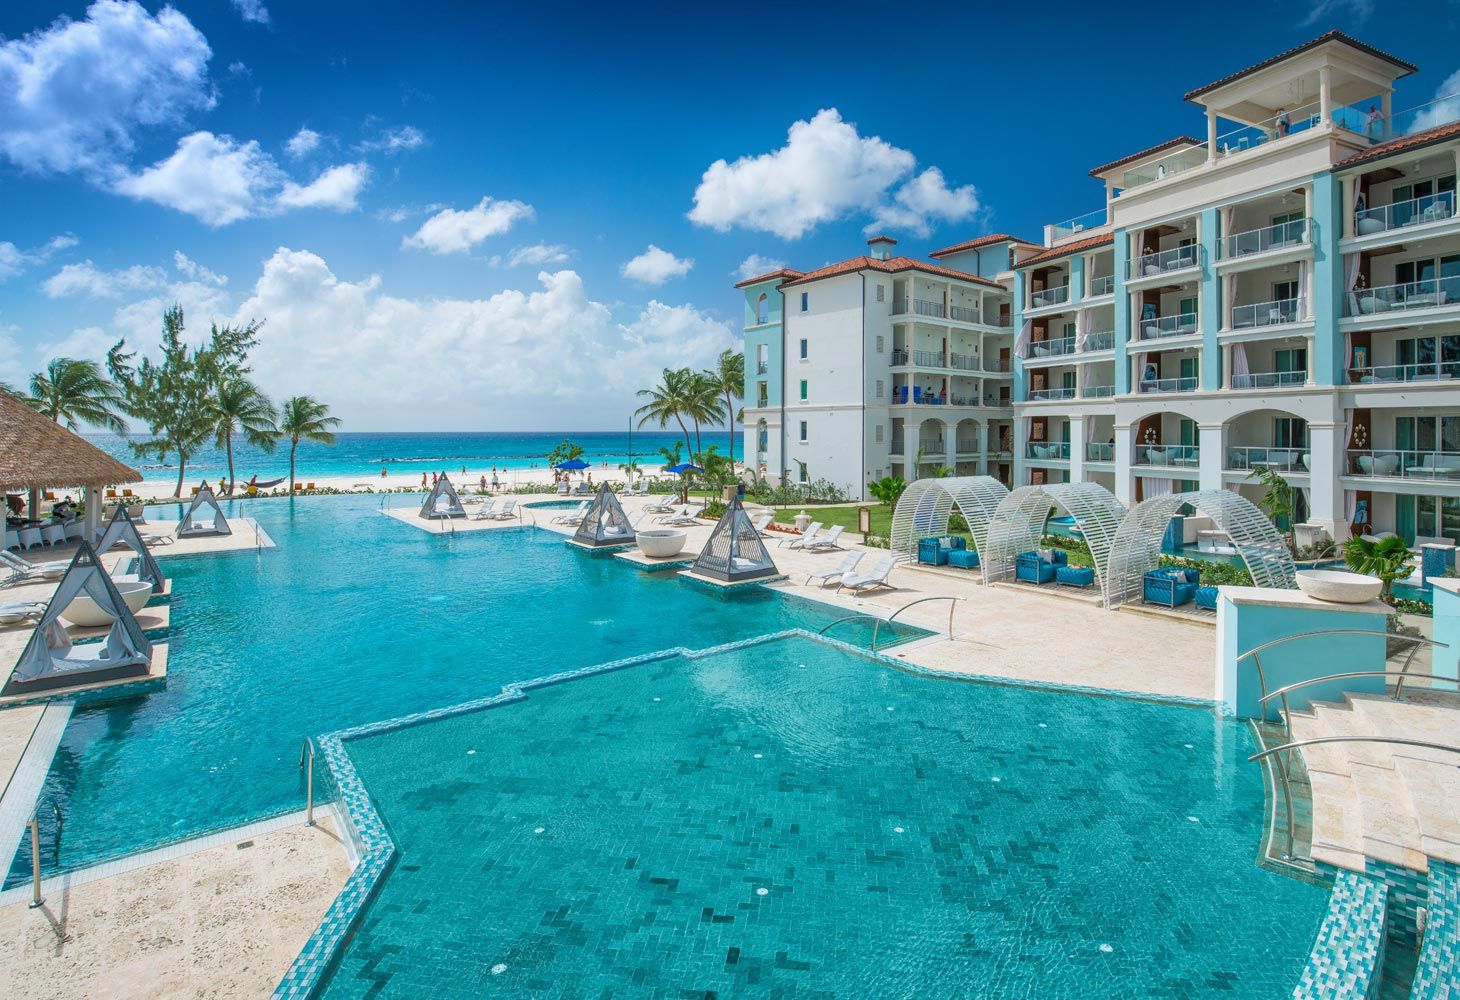 The Magic Behind Sandals Resorts That Keeps Guests Coming Back Again and Again